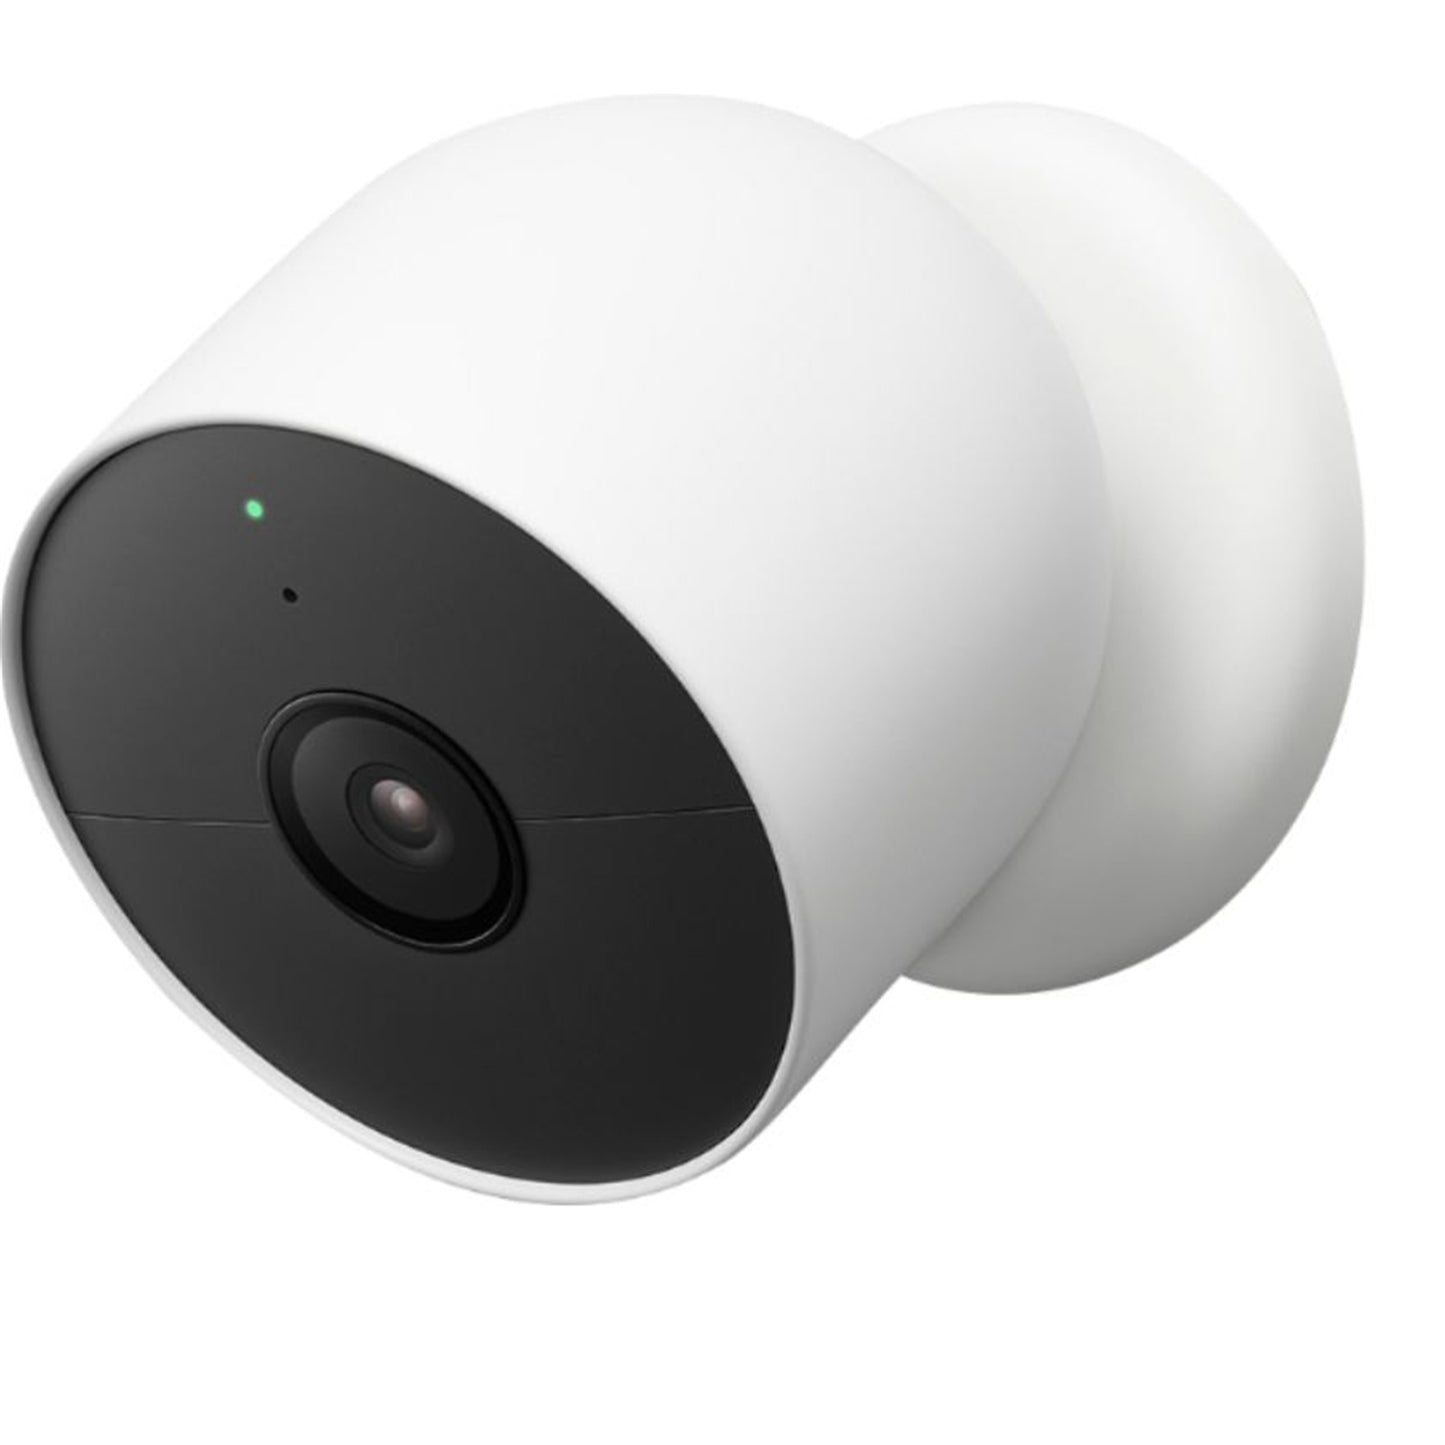 Google Nest Wire-Free Battery Cam